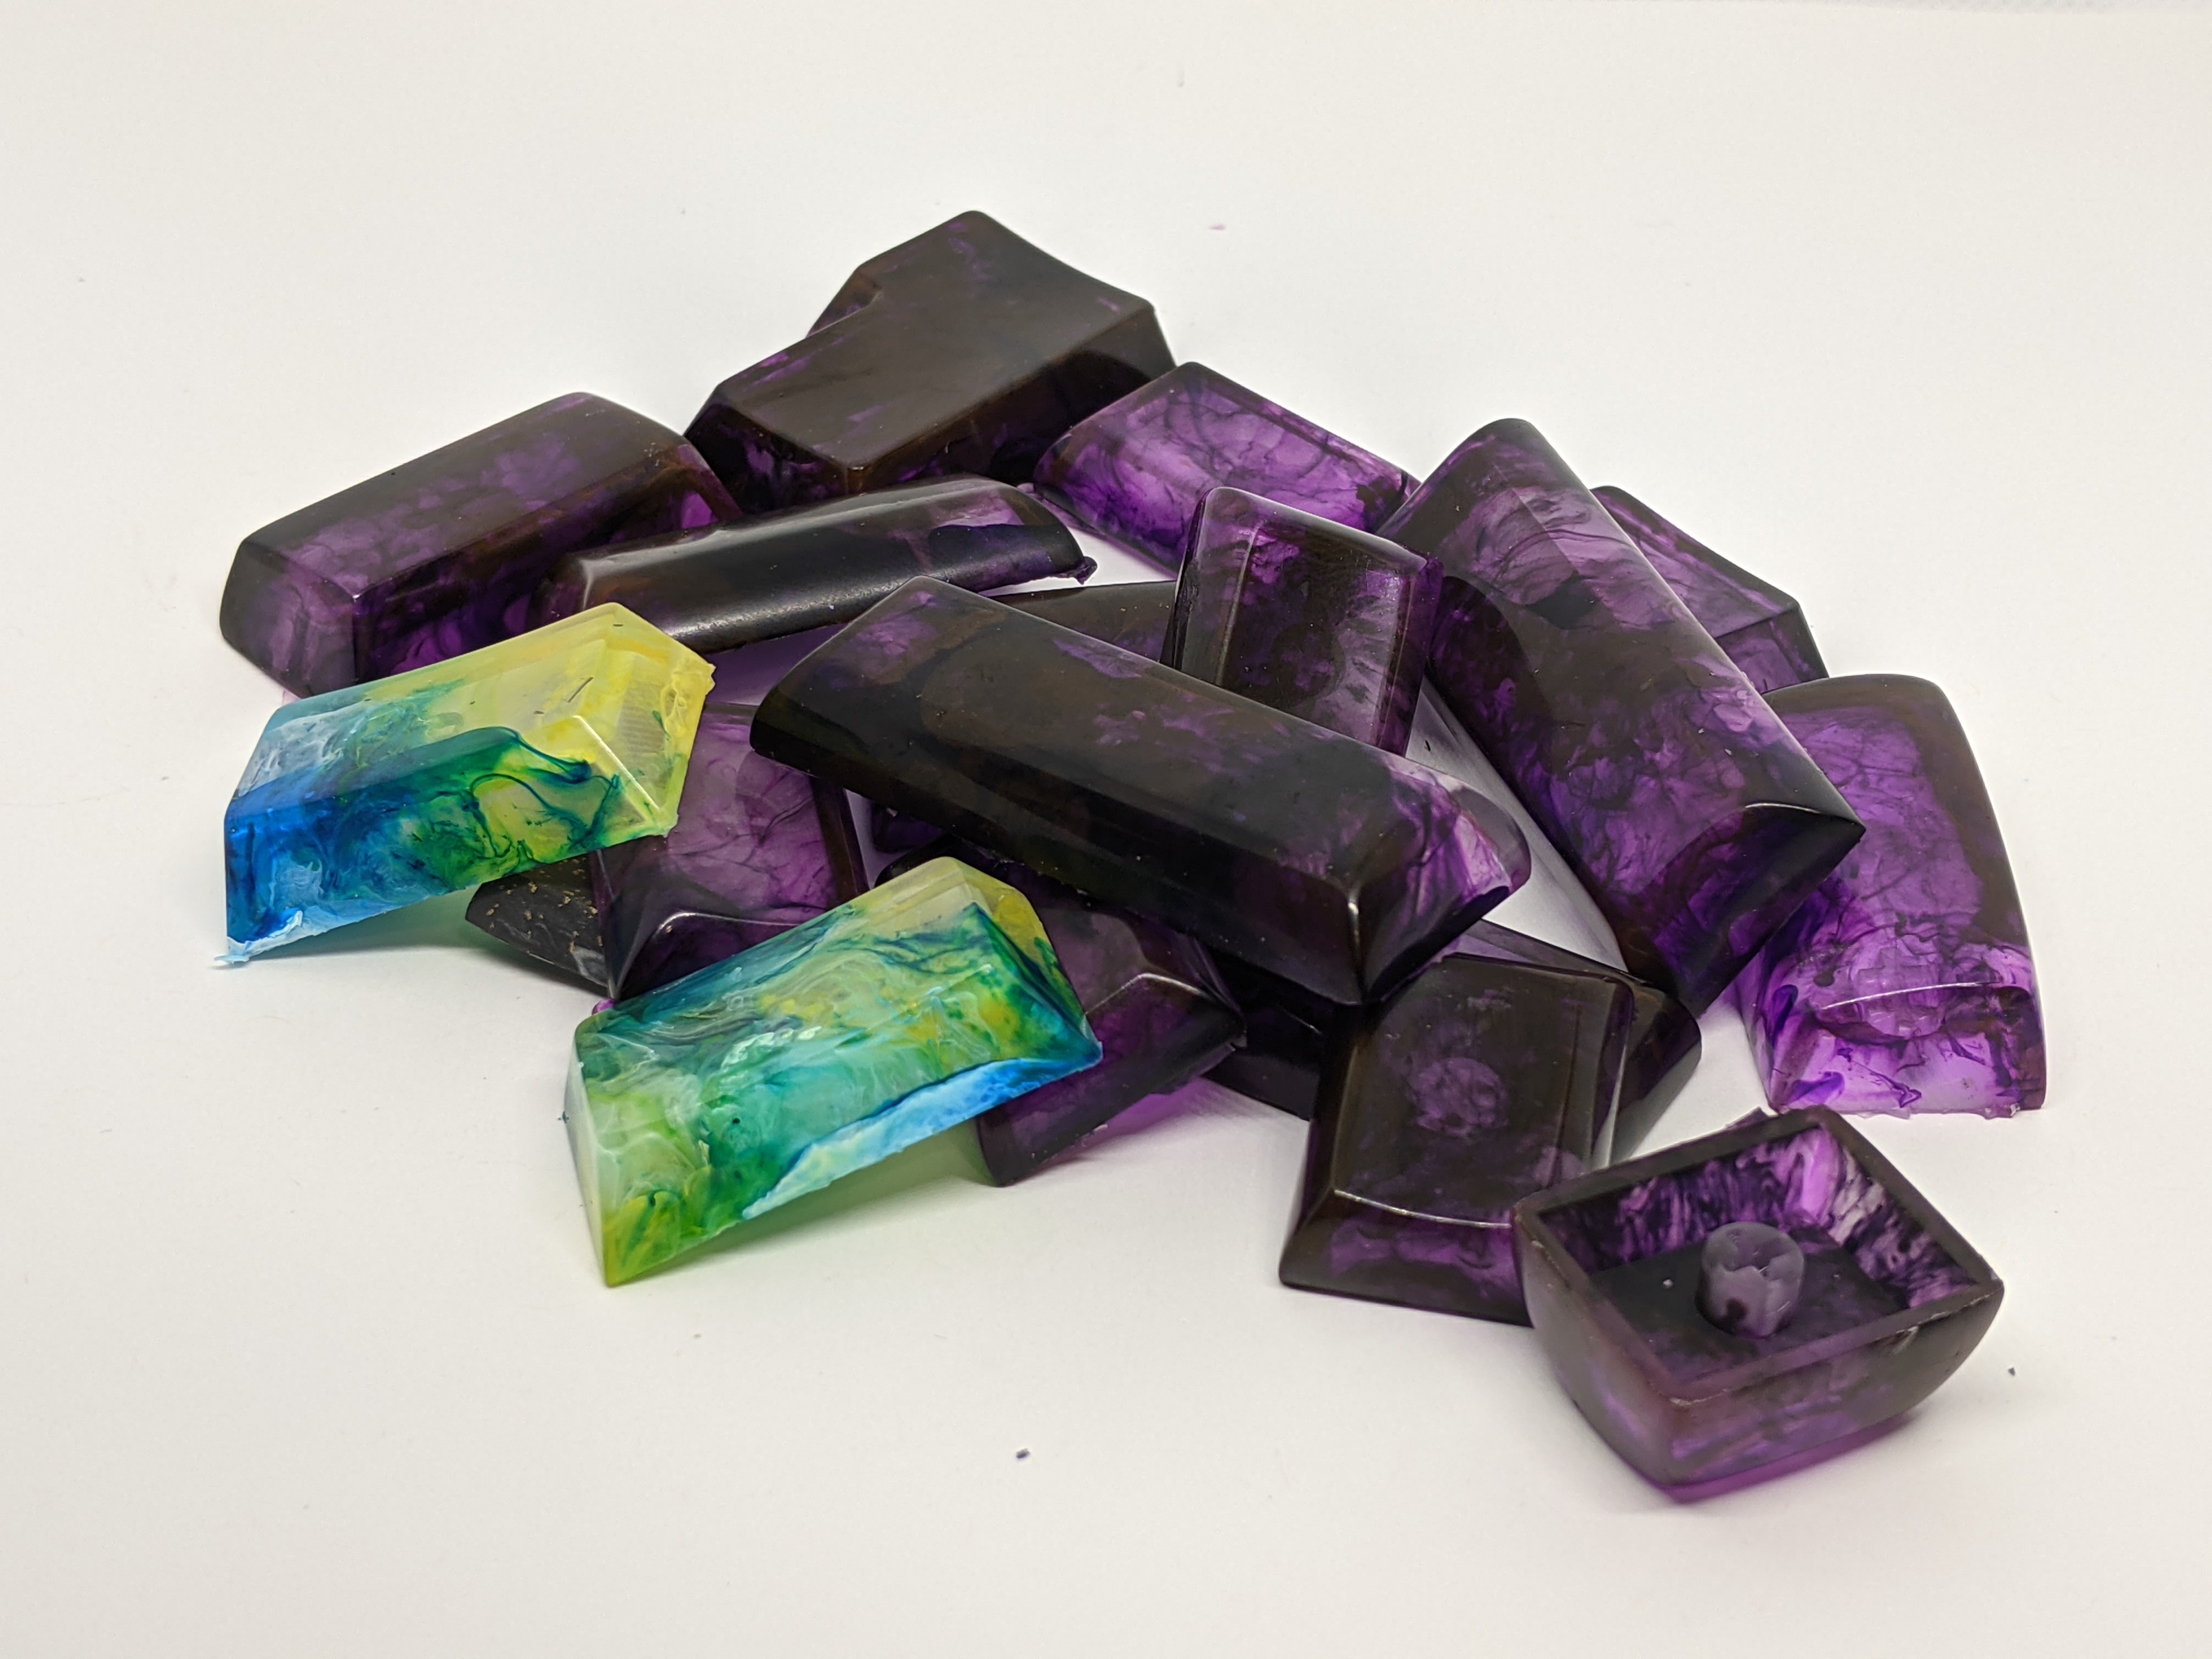 A pile of Asymplex resin keycaps in various profiles